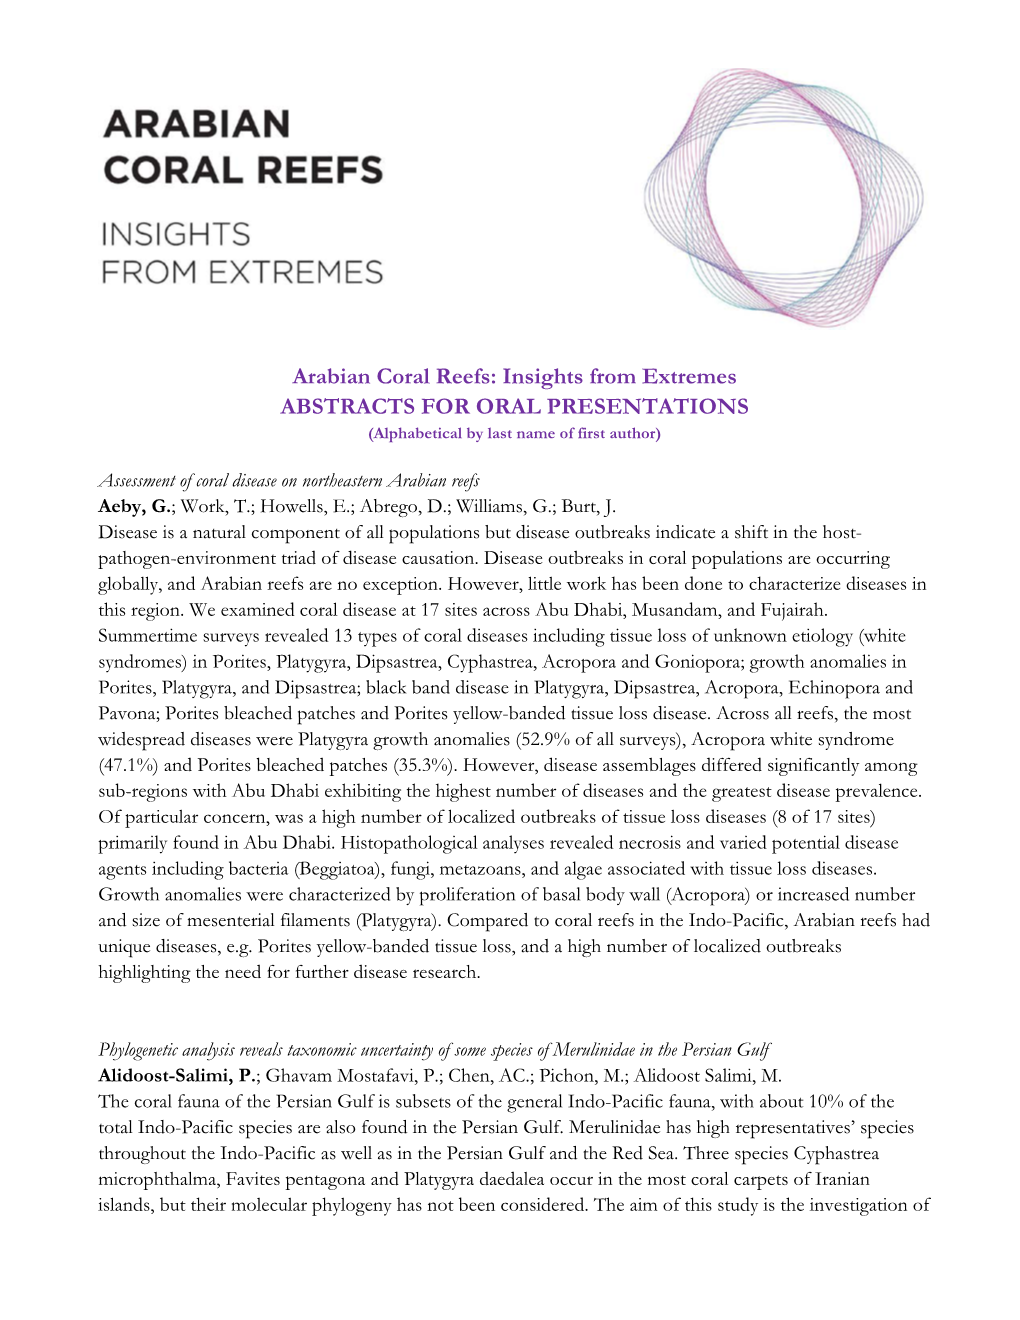 Arabian Coral Reefs: Insights from Extremes ABSTRACTS for ORAL PRESENTATIONS (Alphabetical by Last Name of First Author)